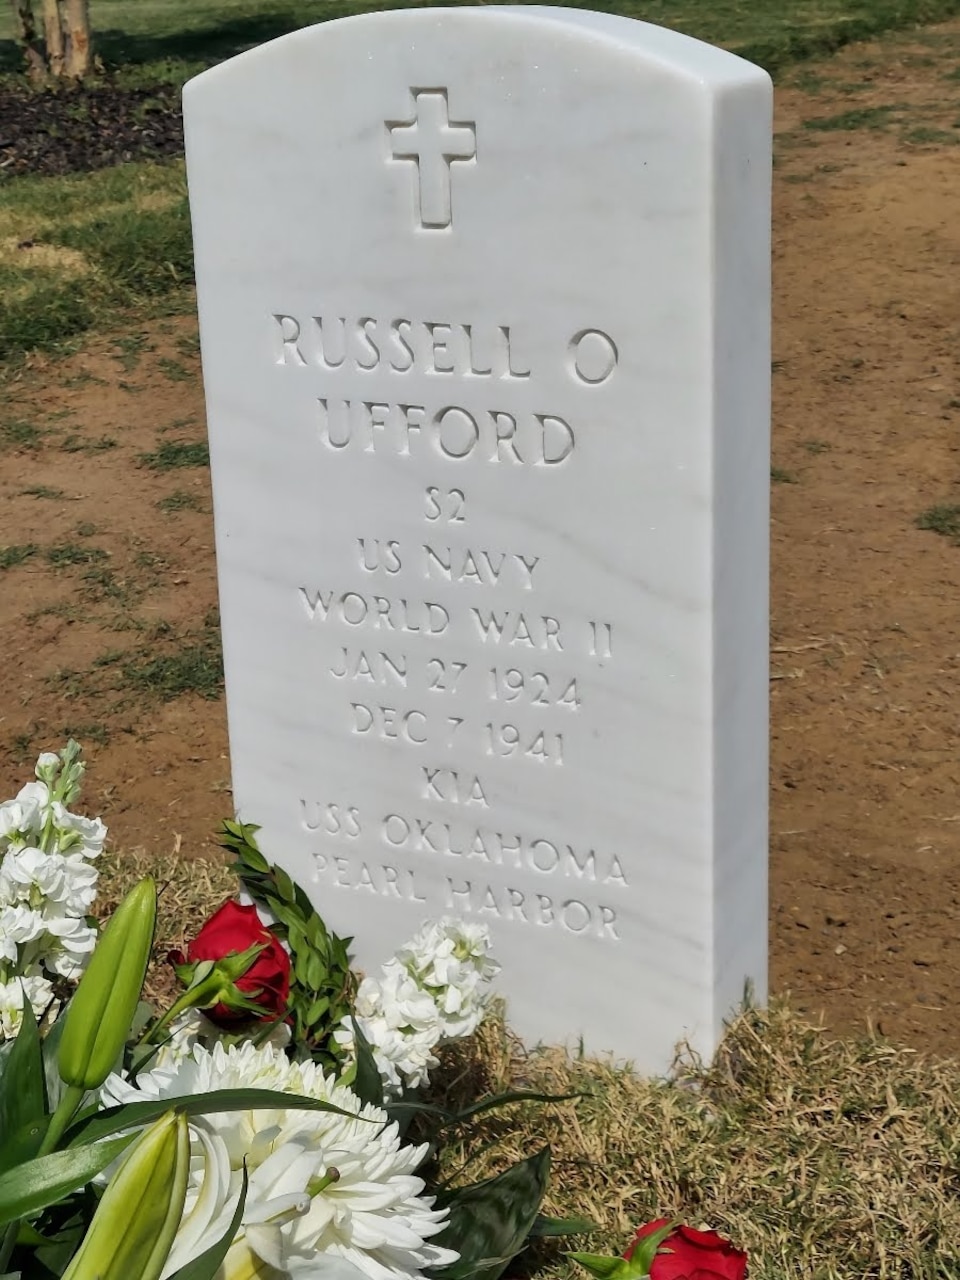 210716-N-ZZ999-001 (July 16, 2021) Raleigh NC. - A headston awaits the remains of Navy Seaman Second Class Russell Orville Ufford of Kansas City, Missour at the Salisbury National Cemetary in Salisbury, NC, on July 16, 2021. Ufford was killed during the attack on Pearl Harbor, December 7, 1941, and he was identified in February this year by the POW/MIA Accounting Agency.(US Navy photo by EO2 Katrena Hovatter)